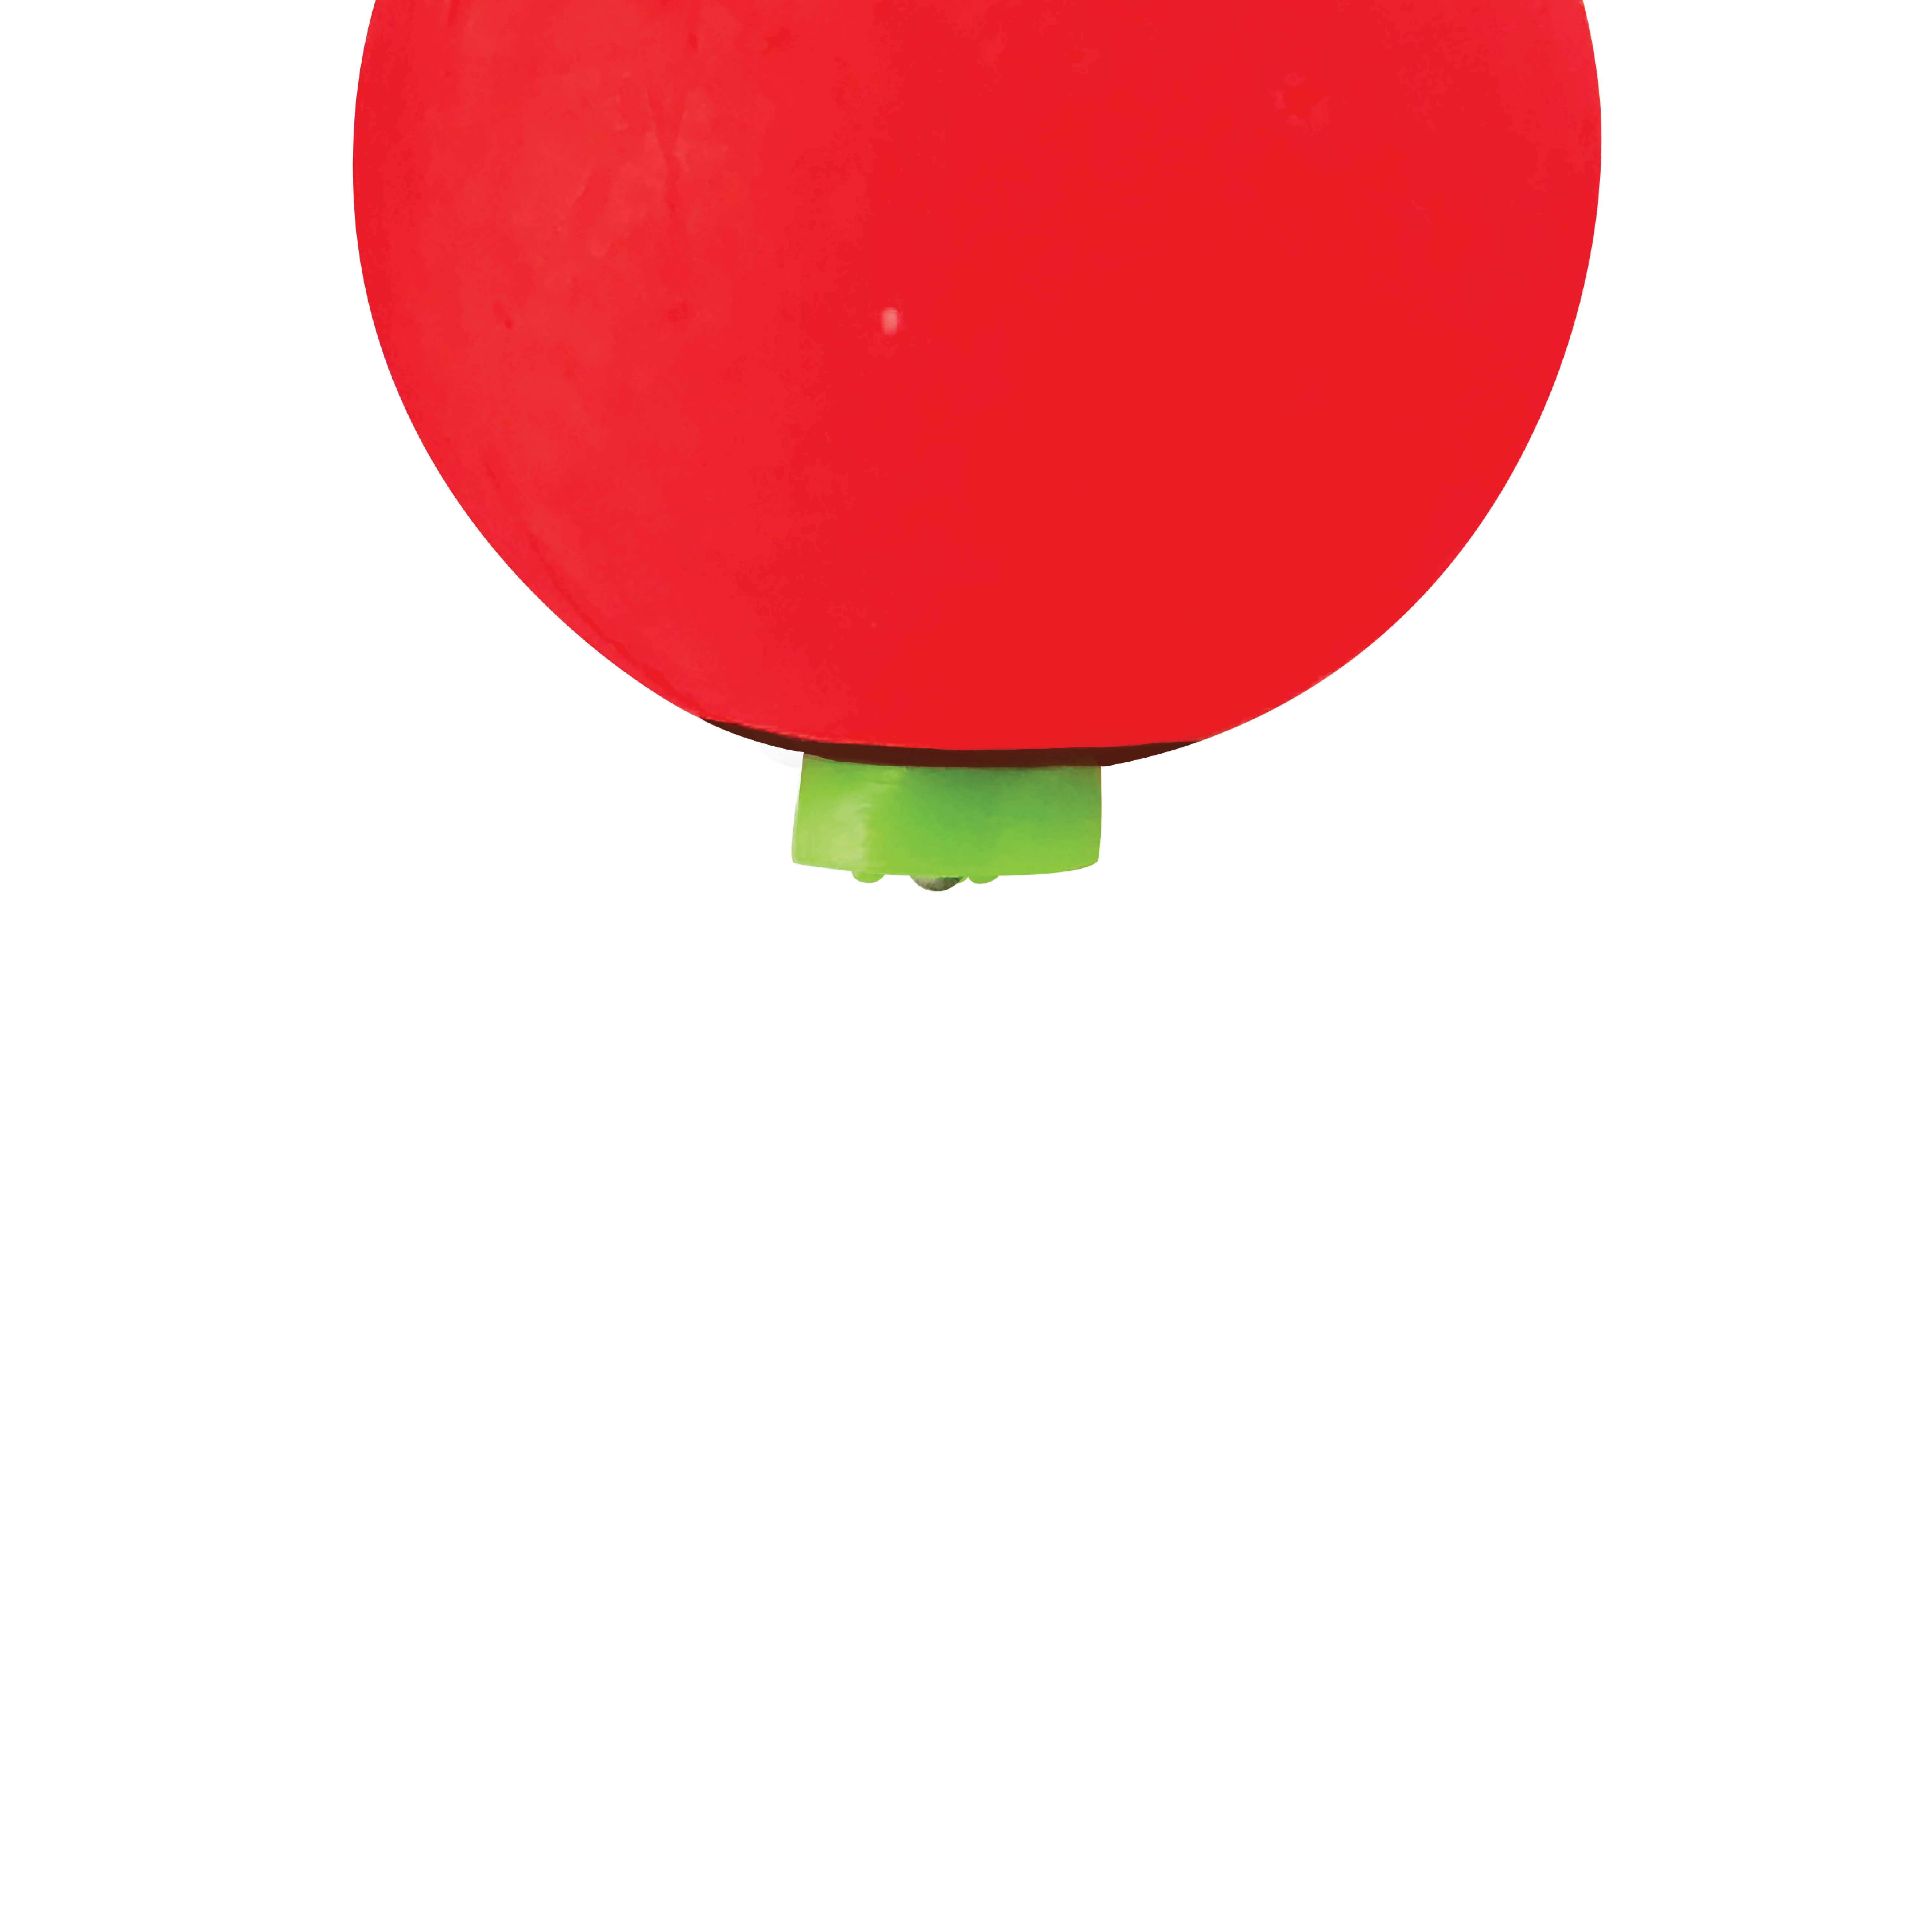 Thill Foam Float Weighted Pear 1.75 inch, Red